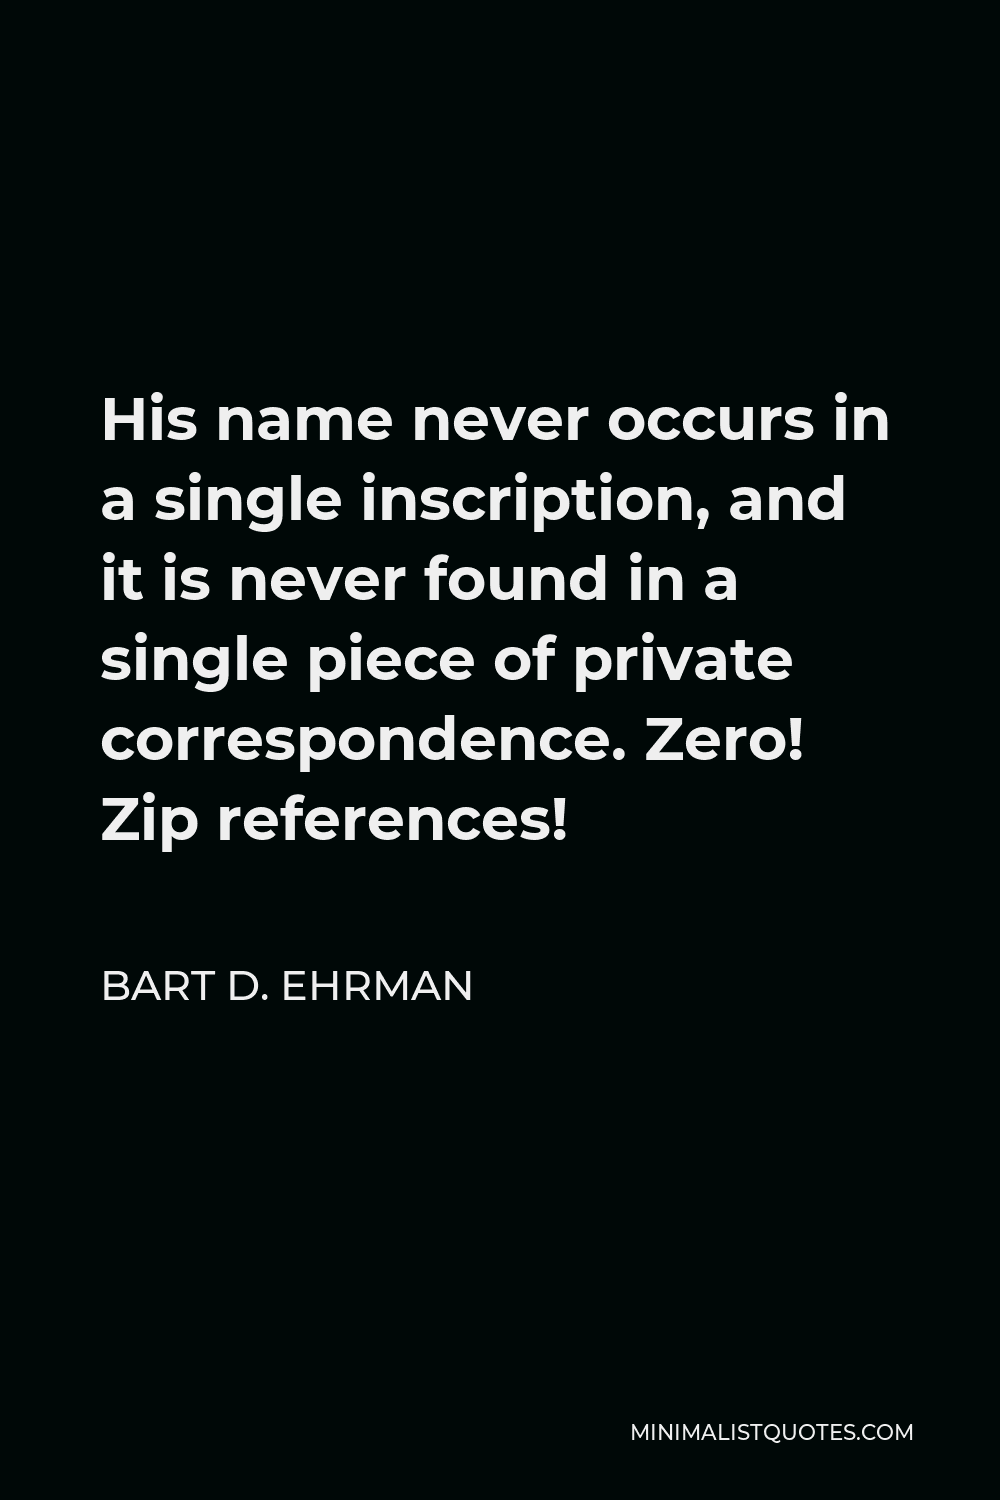 Bart D. Ehrman Quote - His name never occurs in a single inscription, and it is never found in a single piece of private correspondence. Zero! Zip references!